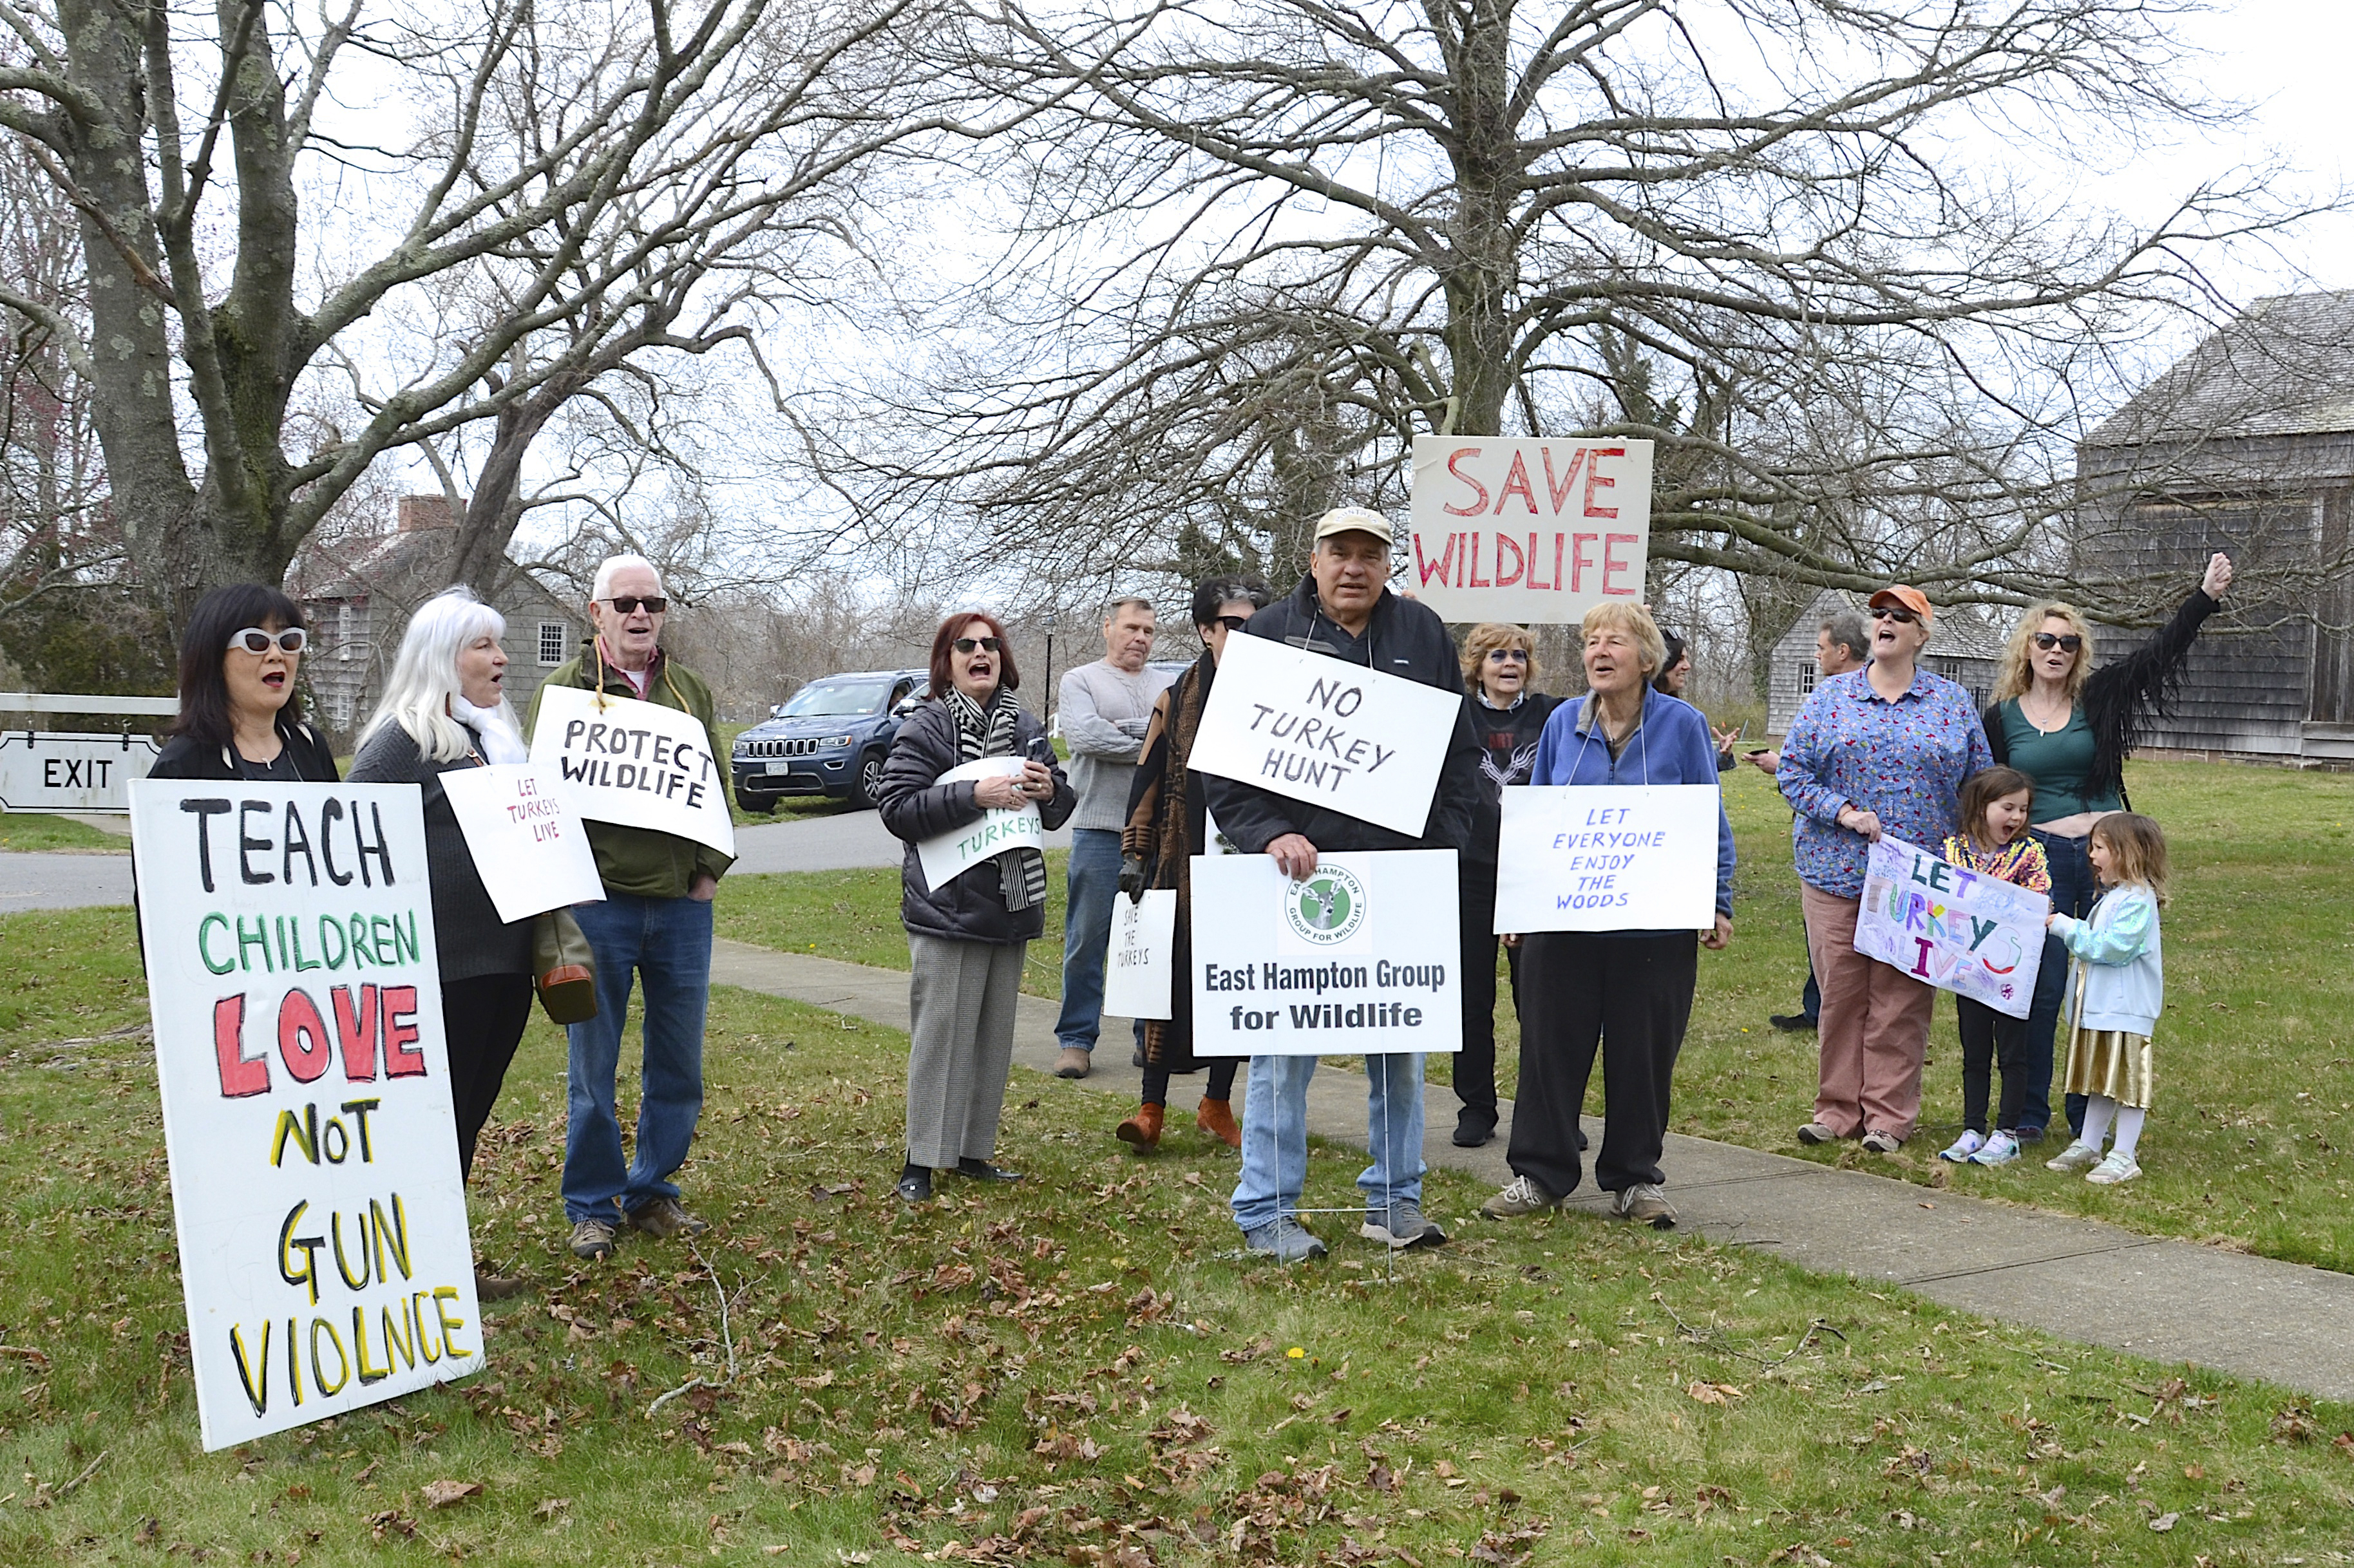 The demonstration hosted by the East Hampton Group for Wildlife opposing the addition of a turkey hunting season in May was held in front of Town Hall prior to the meeting.  KYRIL BROMLEY